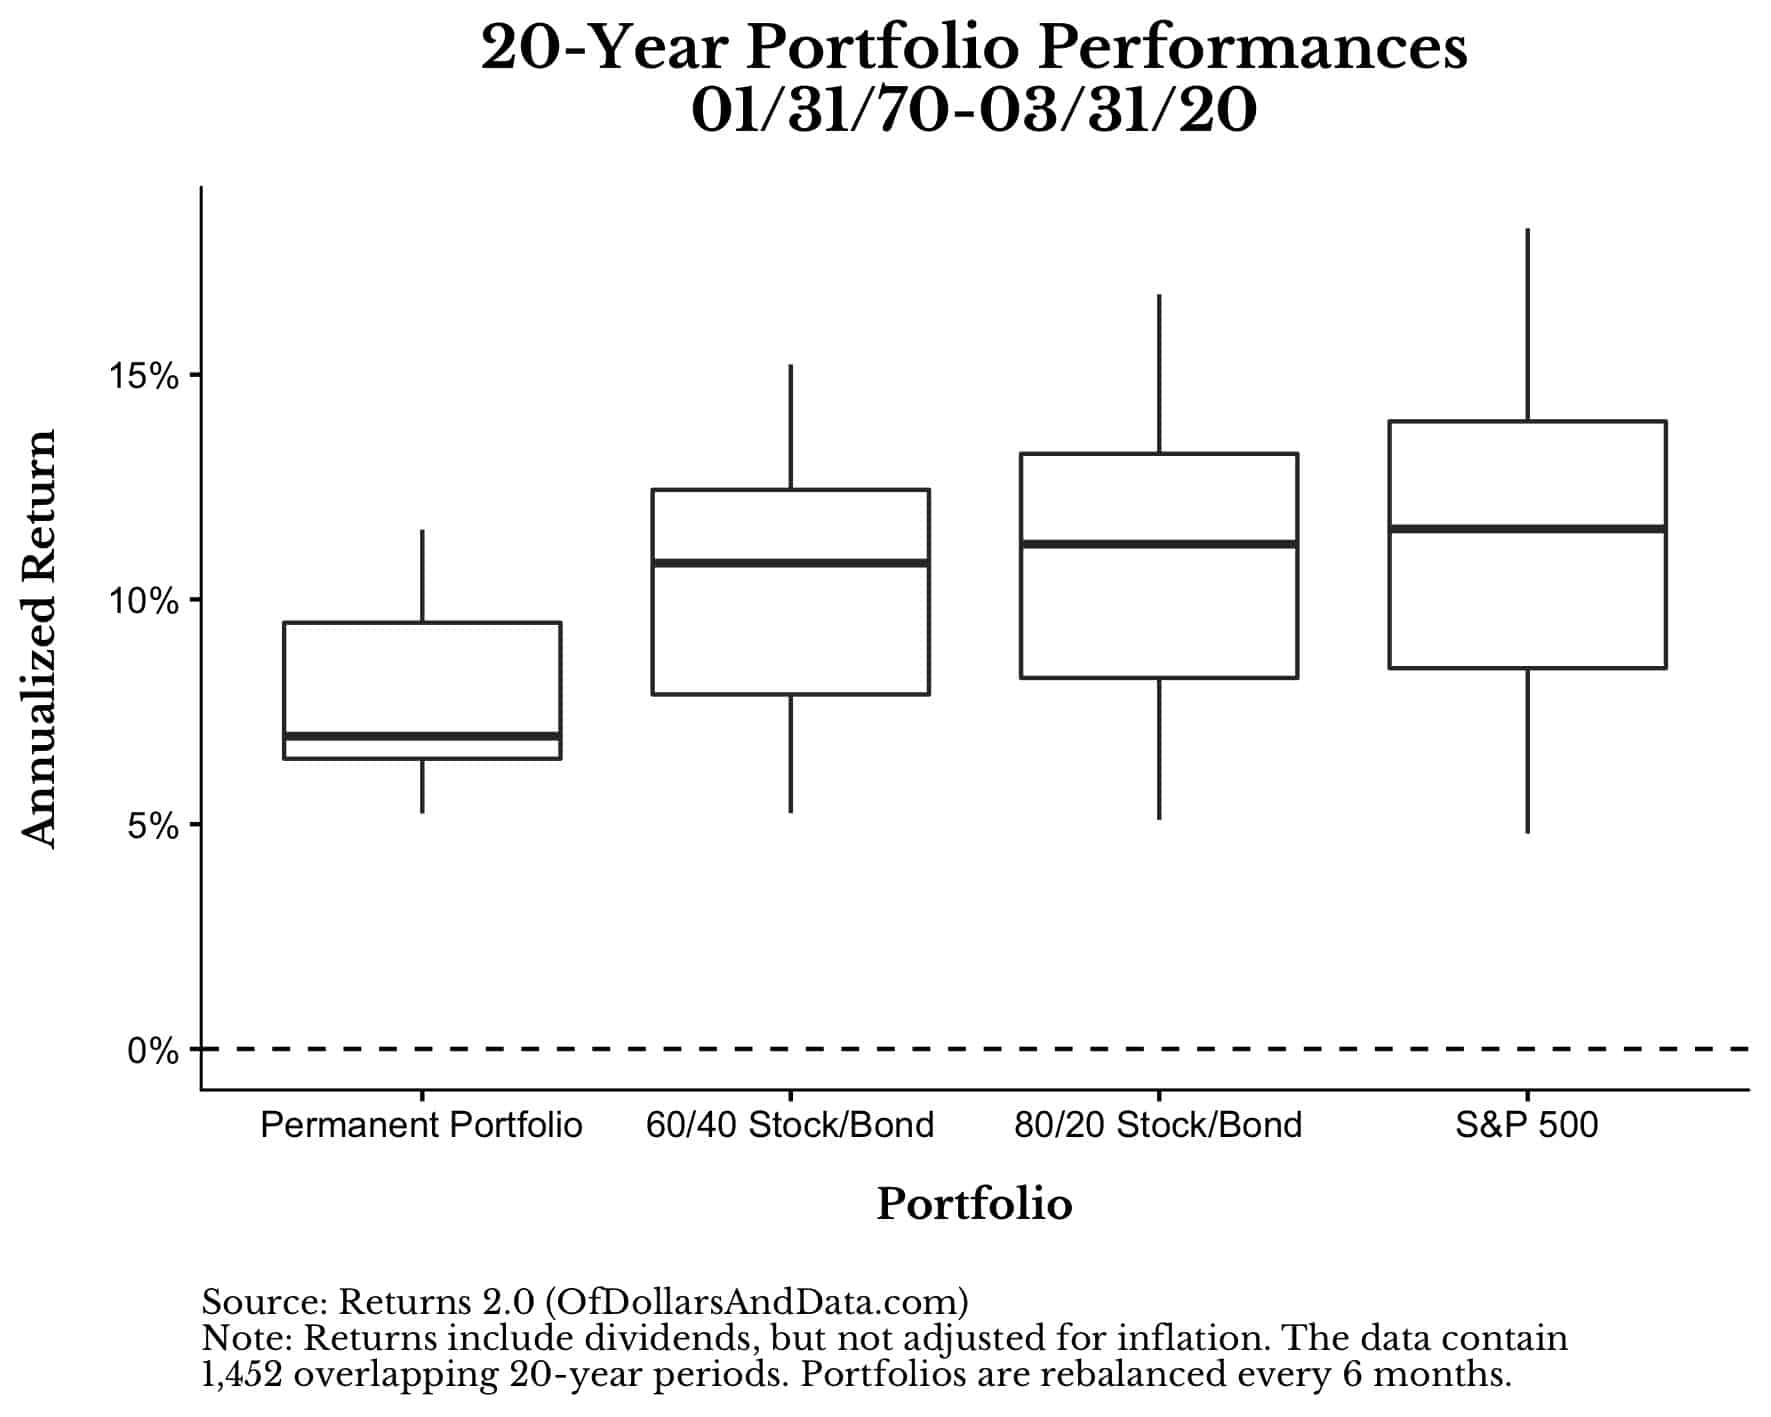 20-Year boxplot of performance for the Permanent Portfolio, 60/40, 80/20, and the S&P 500 from 1970 to 2020